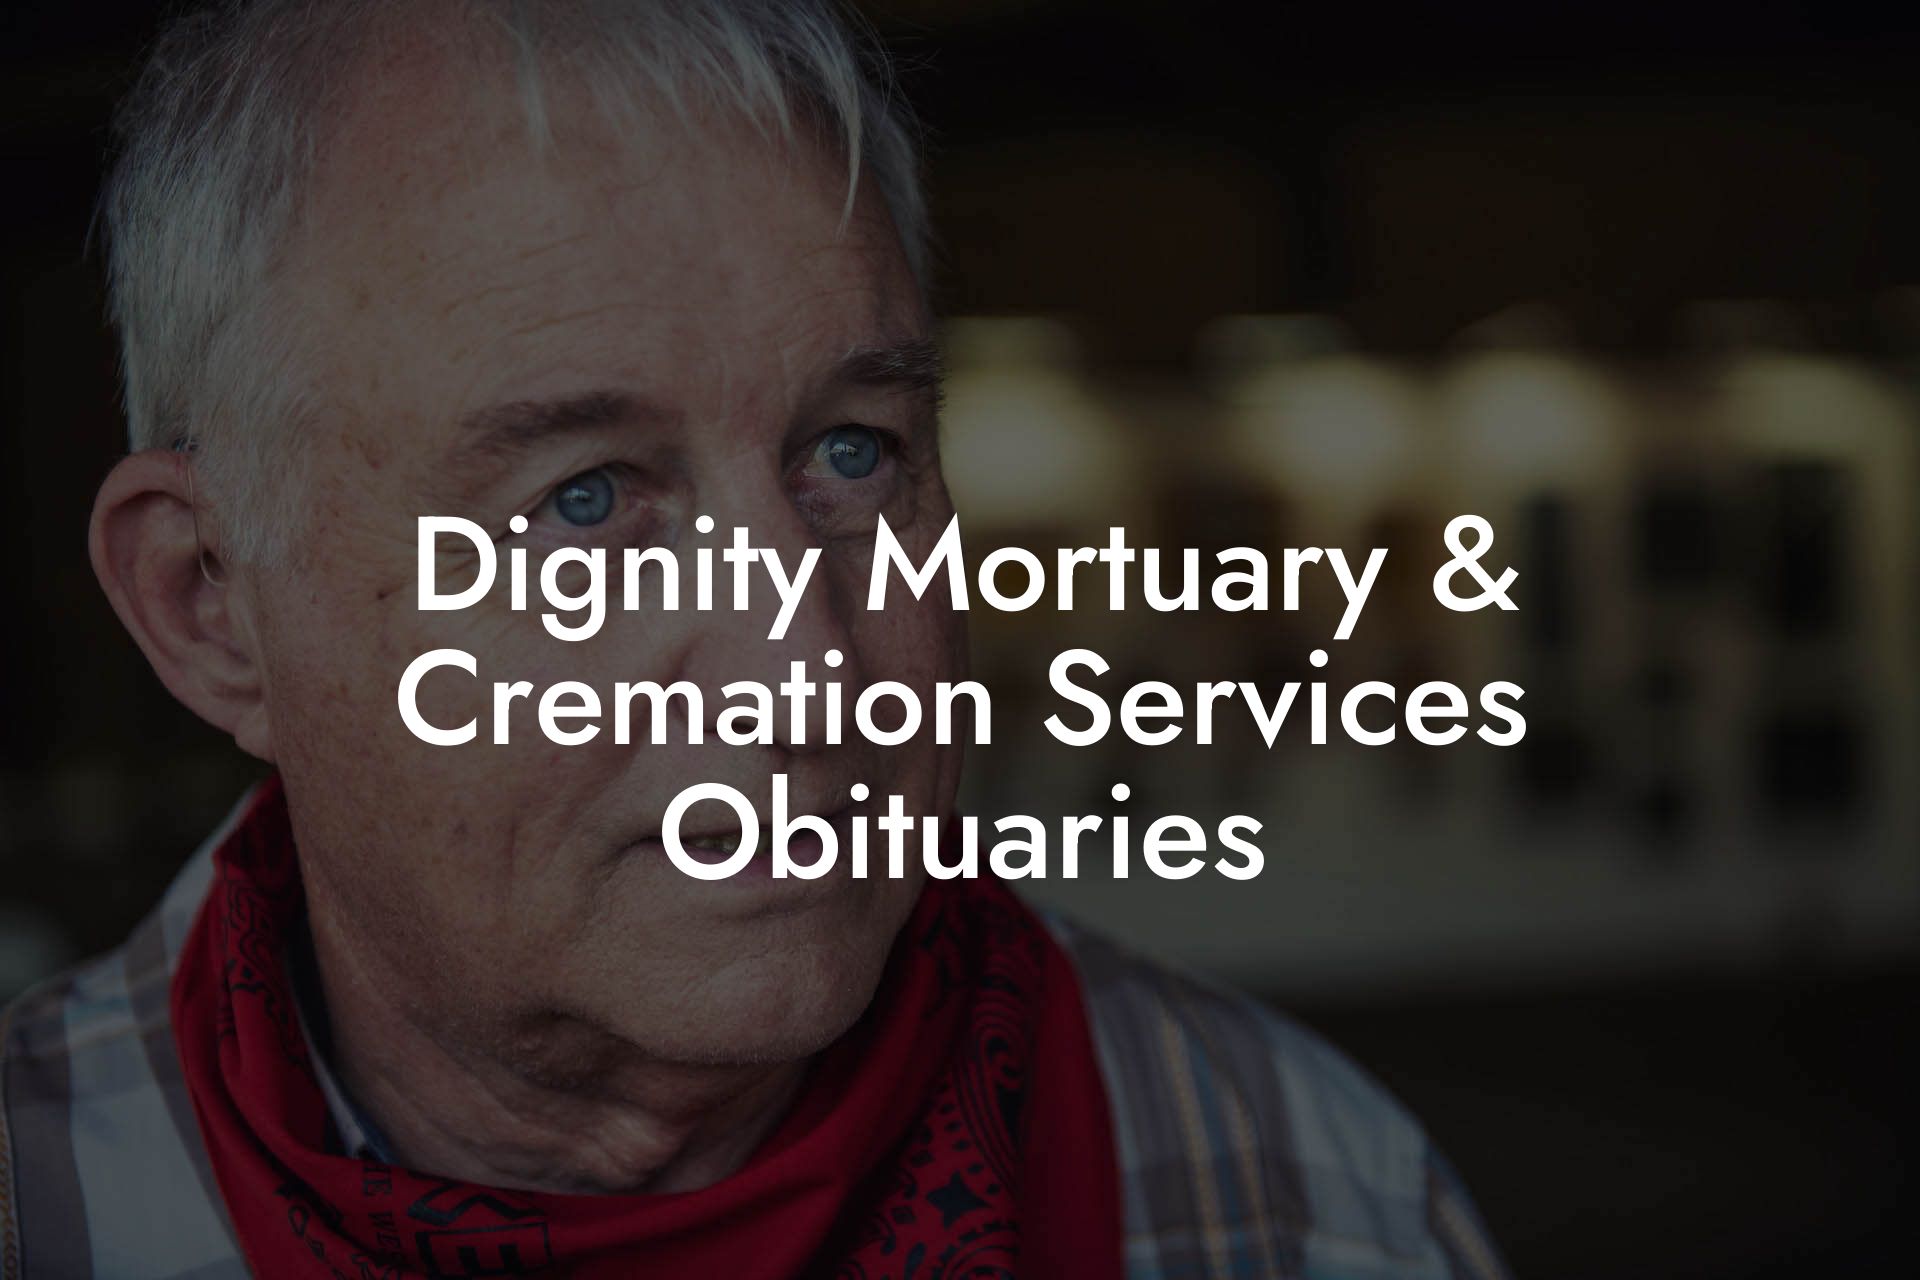 Dignity Mortuary & Cremation Services Obituaries